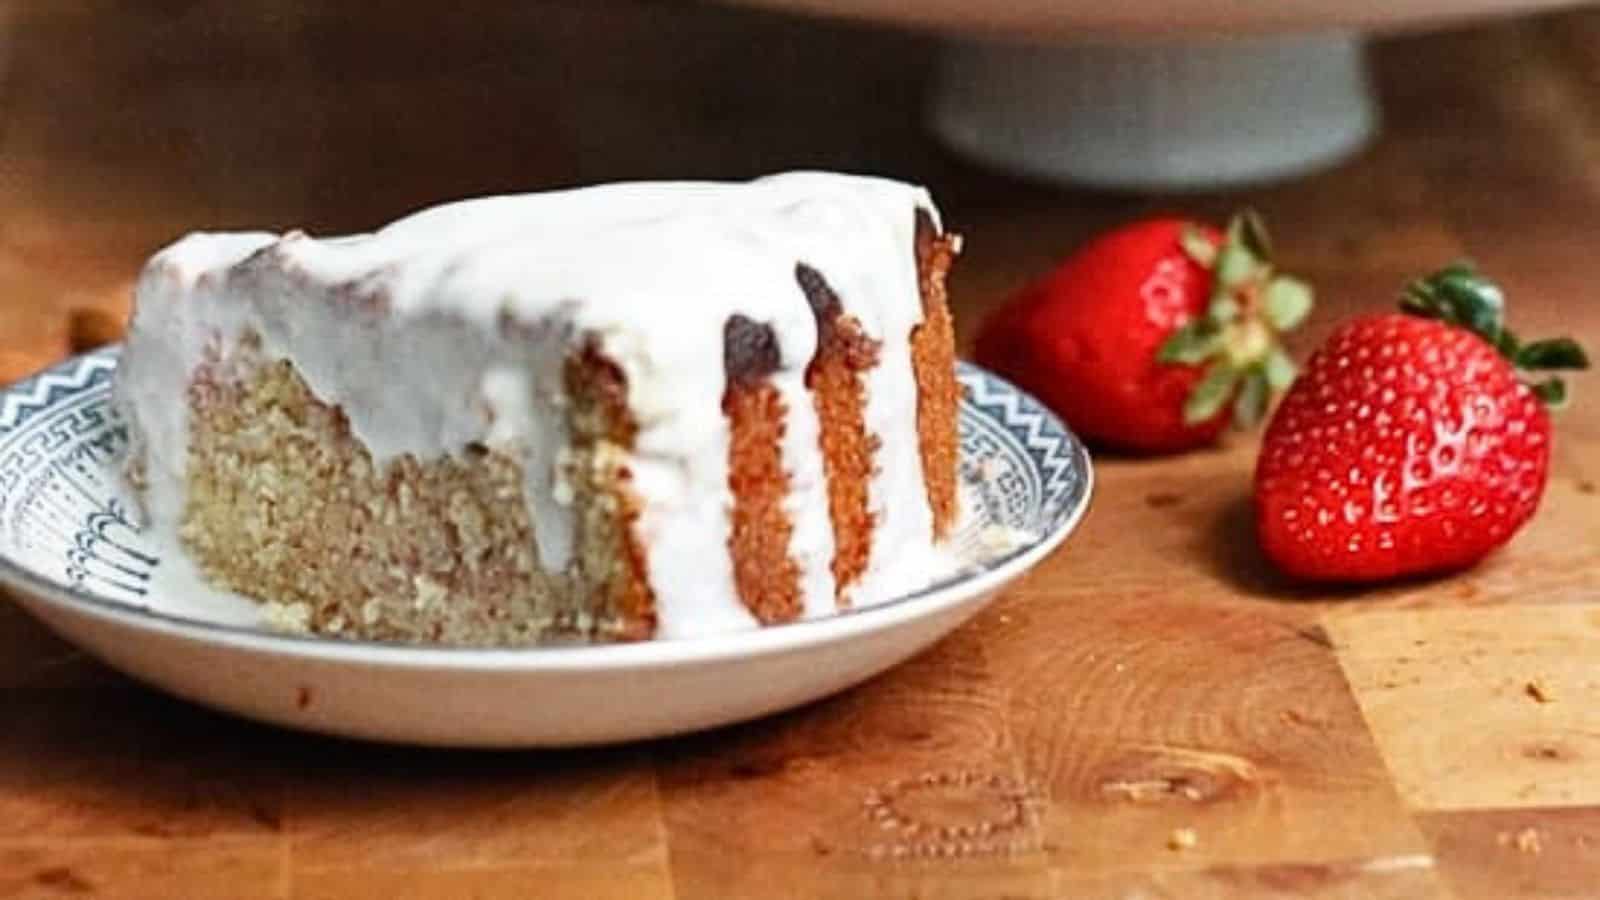 <p>Lemon almond yogurt cake with strawberries is a moist and zesty treat ready in an hour. The cake has a subtle almond flavor with a citrusy lemon zing, topped with fresh strawberries. It’s a light and refreshing dessert that’s perfect for a weekend brunch.<br><strong>Get the Recipe: </strong><a href="https://immigrantstable.com/lemon-almond-yogurt-cake-strawberries-weekend/?utm_source=msn&utm_medium=page&utm_campaign=23%20berry%20recipes%20bursting%20with%20sweetness%20too%20good%20to%20pass%20up">Lemon almond yogurt cake with strawberries</a></p>